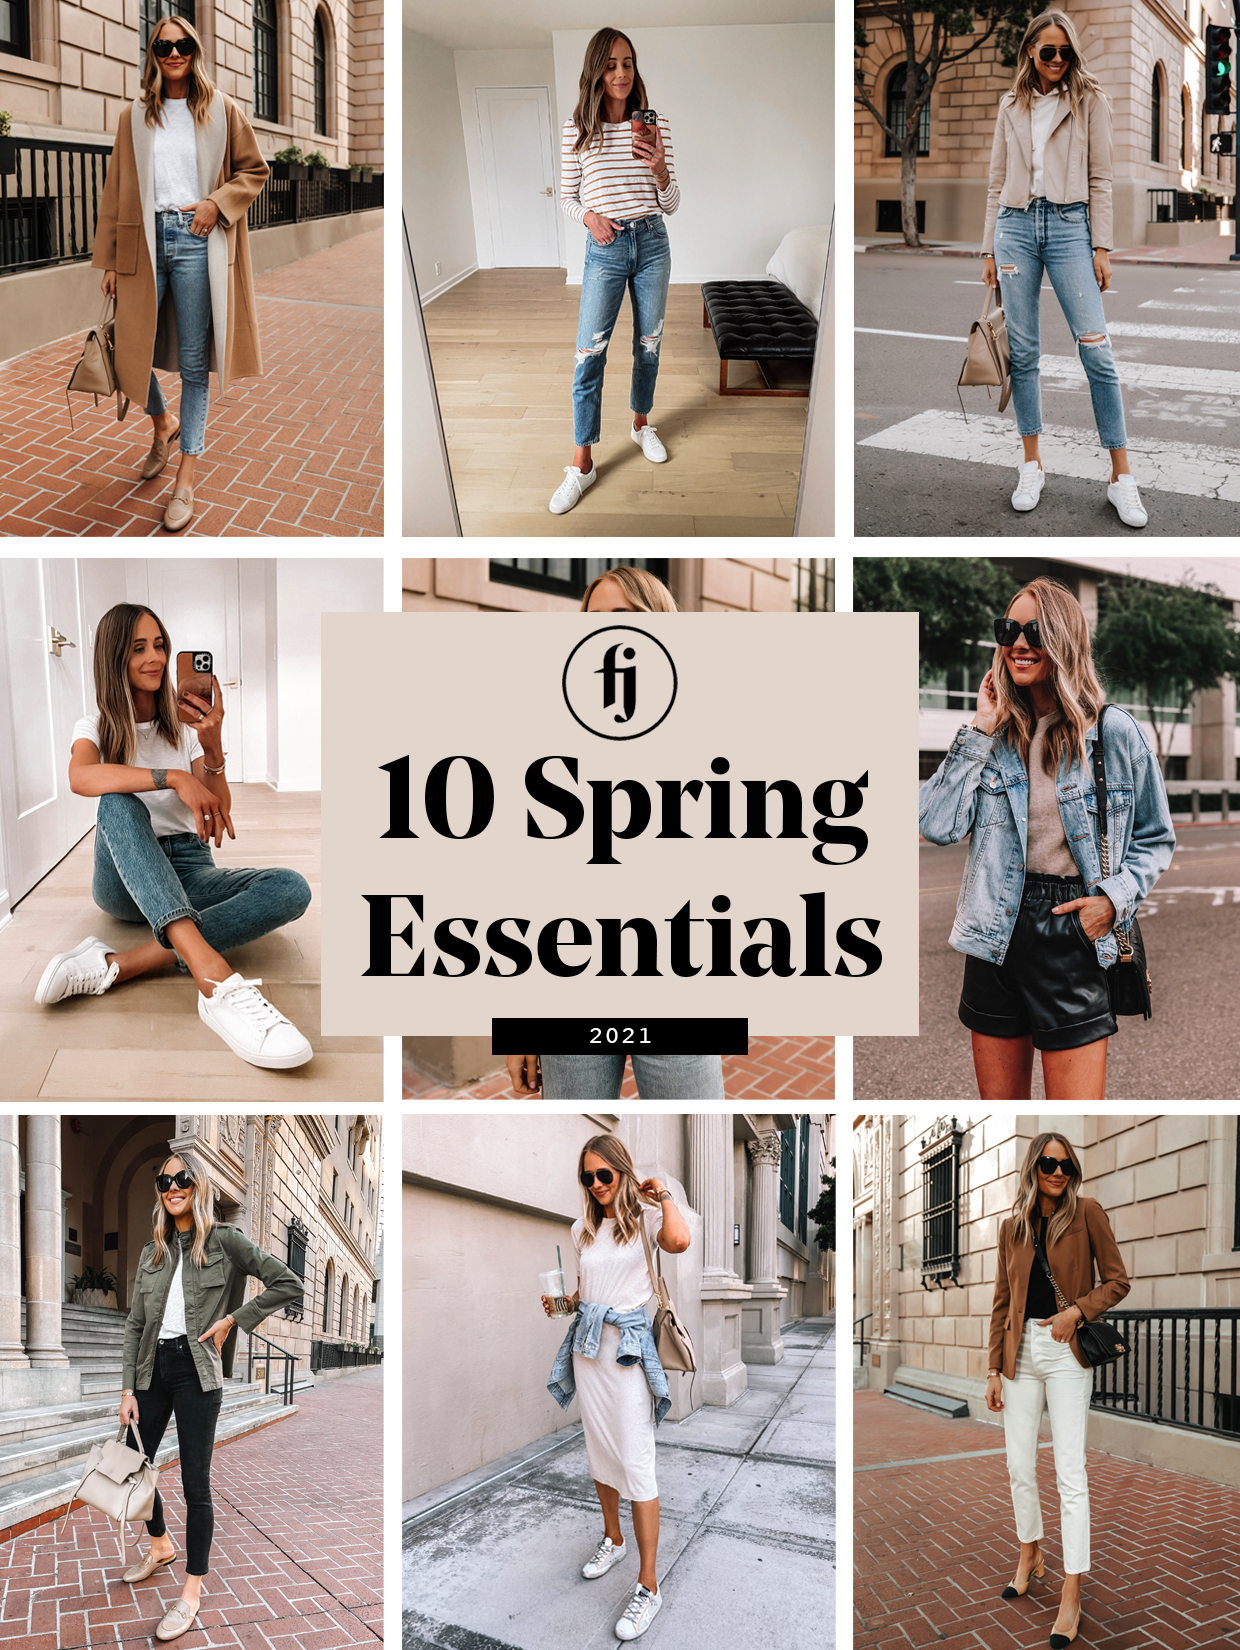 Find Out Where To Get The Bag  Spring outfits, Fashion clothes women,  Outfits